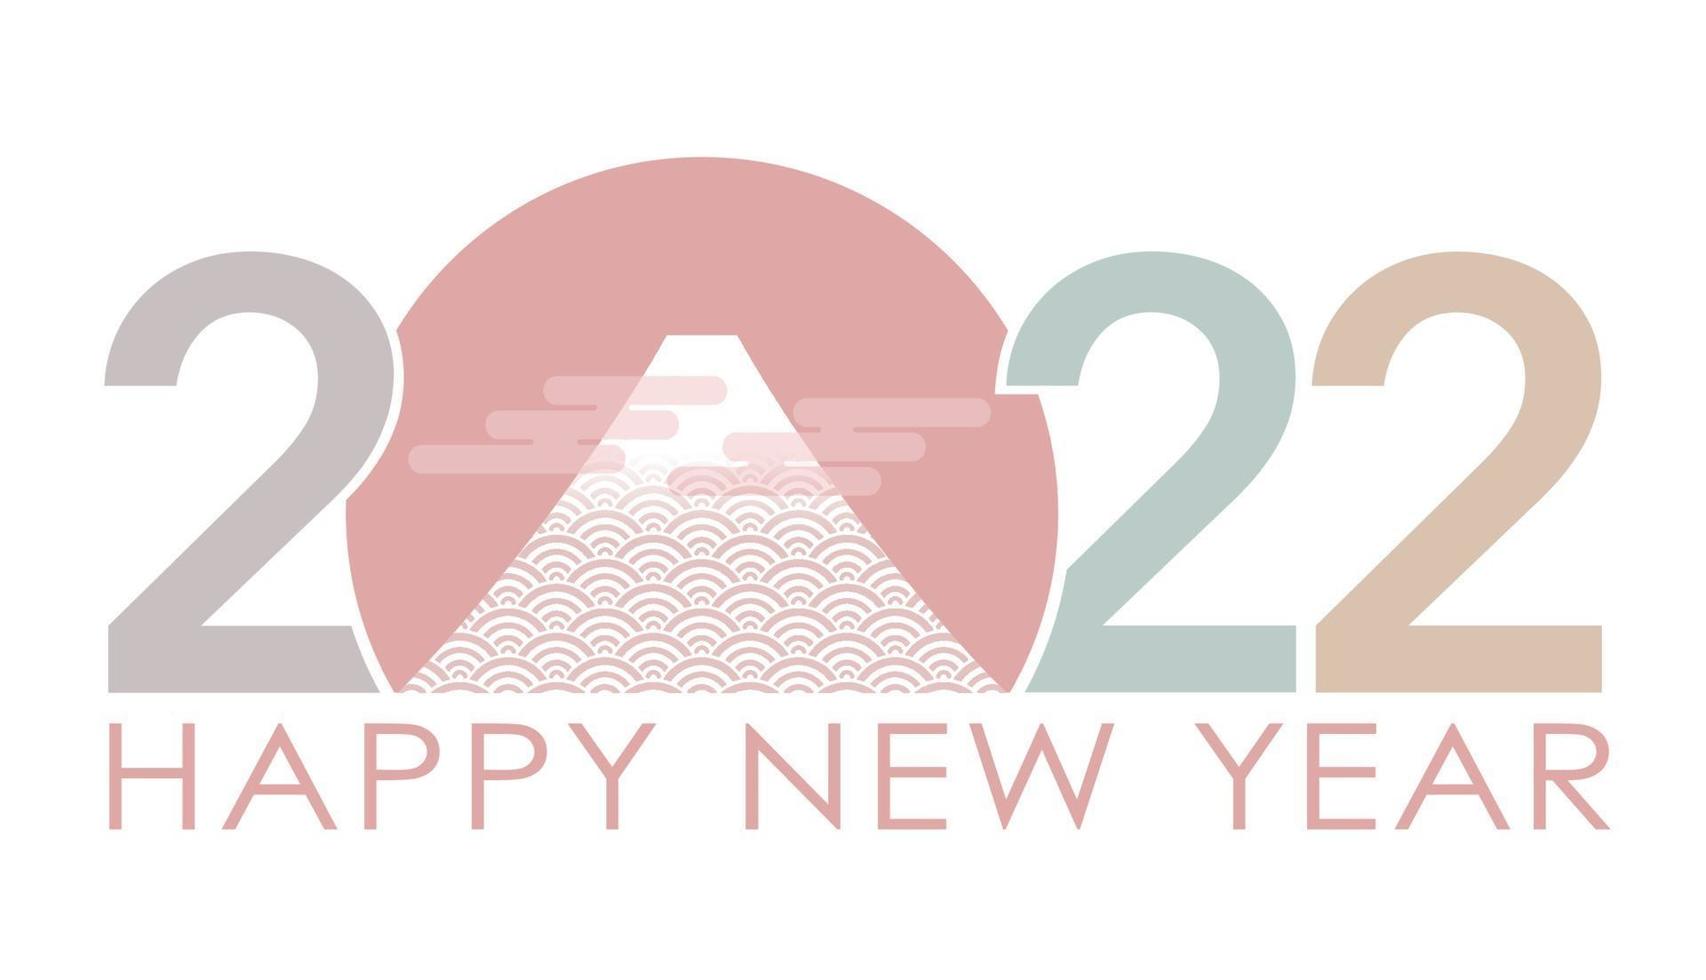 The Year 2022 New Years Vector Greeting Symbol With Mt. Fuji.